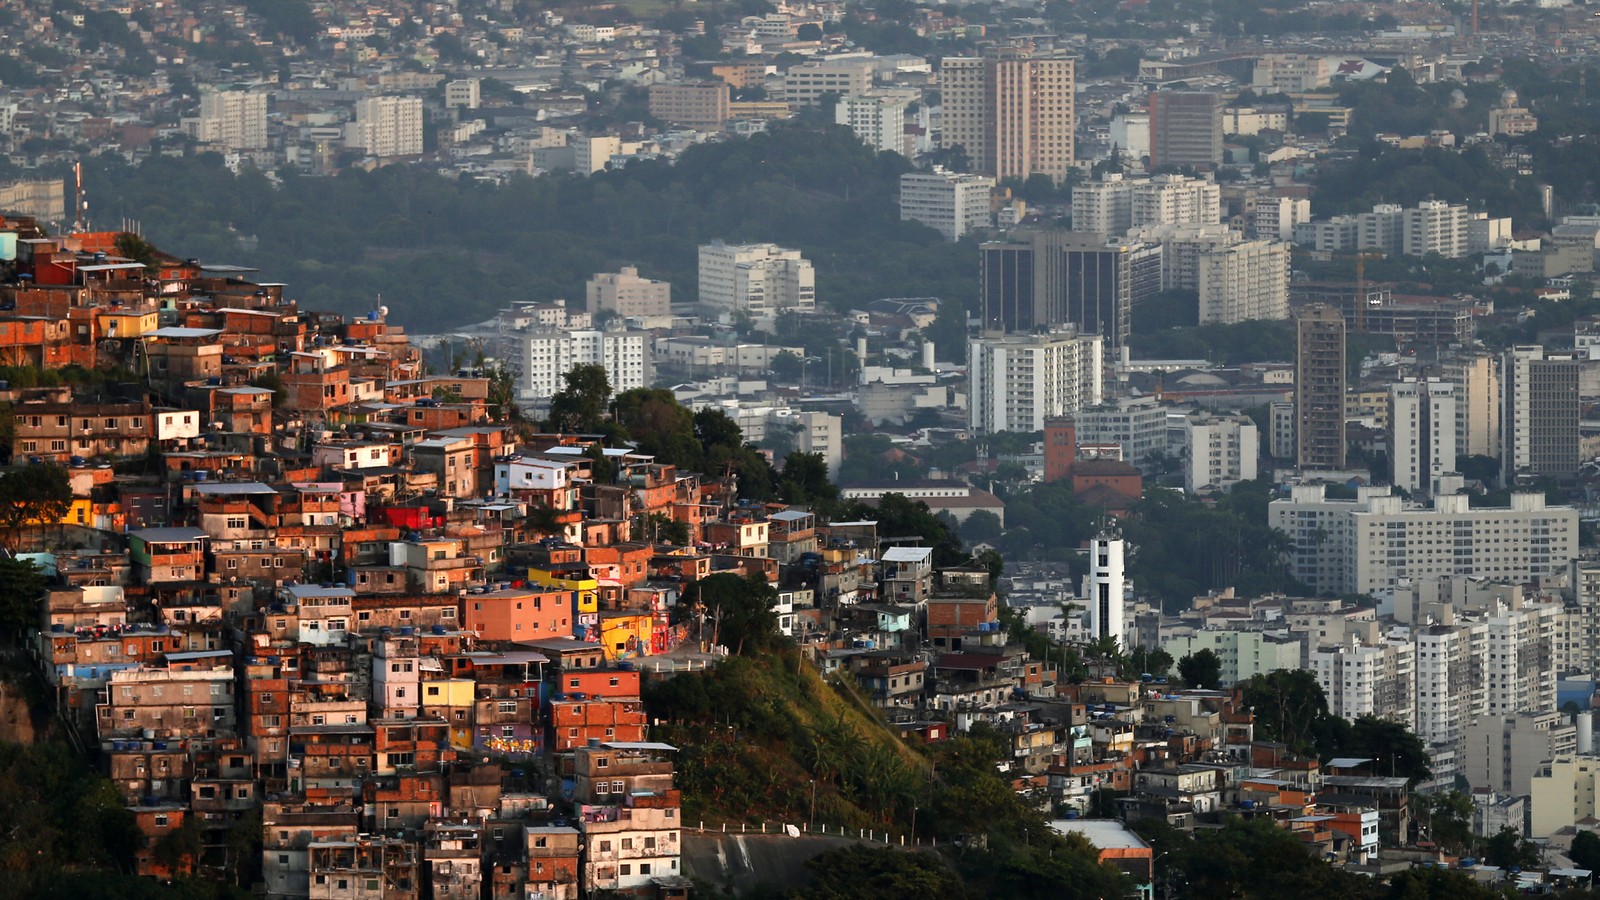 Violence, Poverty and Resistance in Rio de Janeiro's Favelas - The